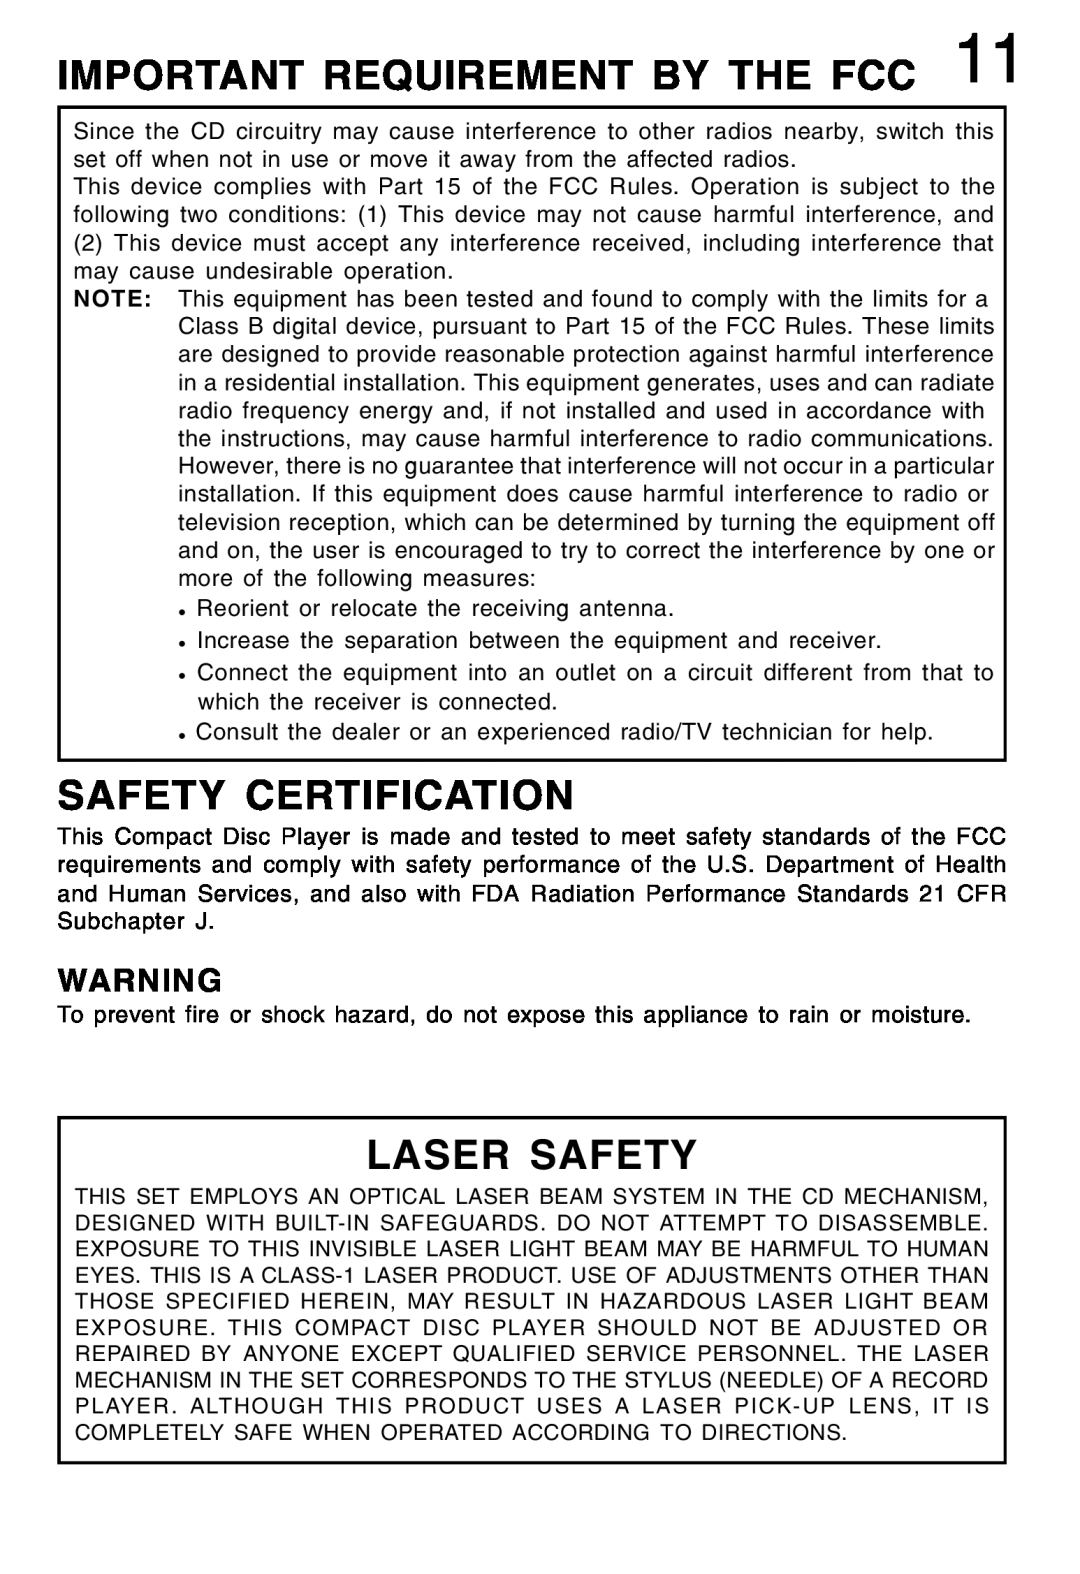 Lenoxx Electronics CD-52 manual Important Requirement By The Fcc, Safety Certification, Laser Safety 